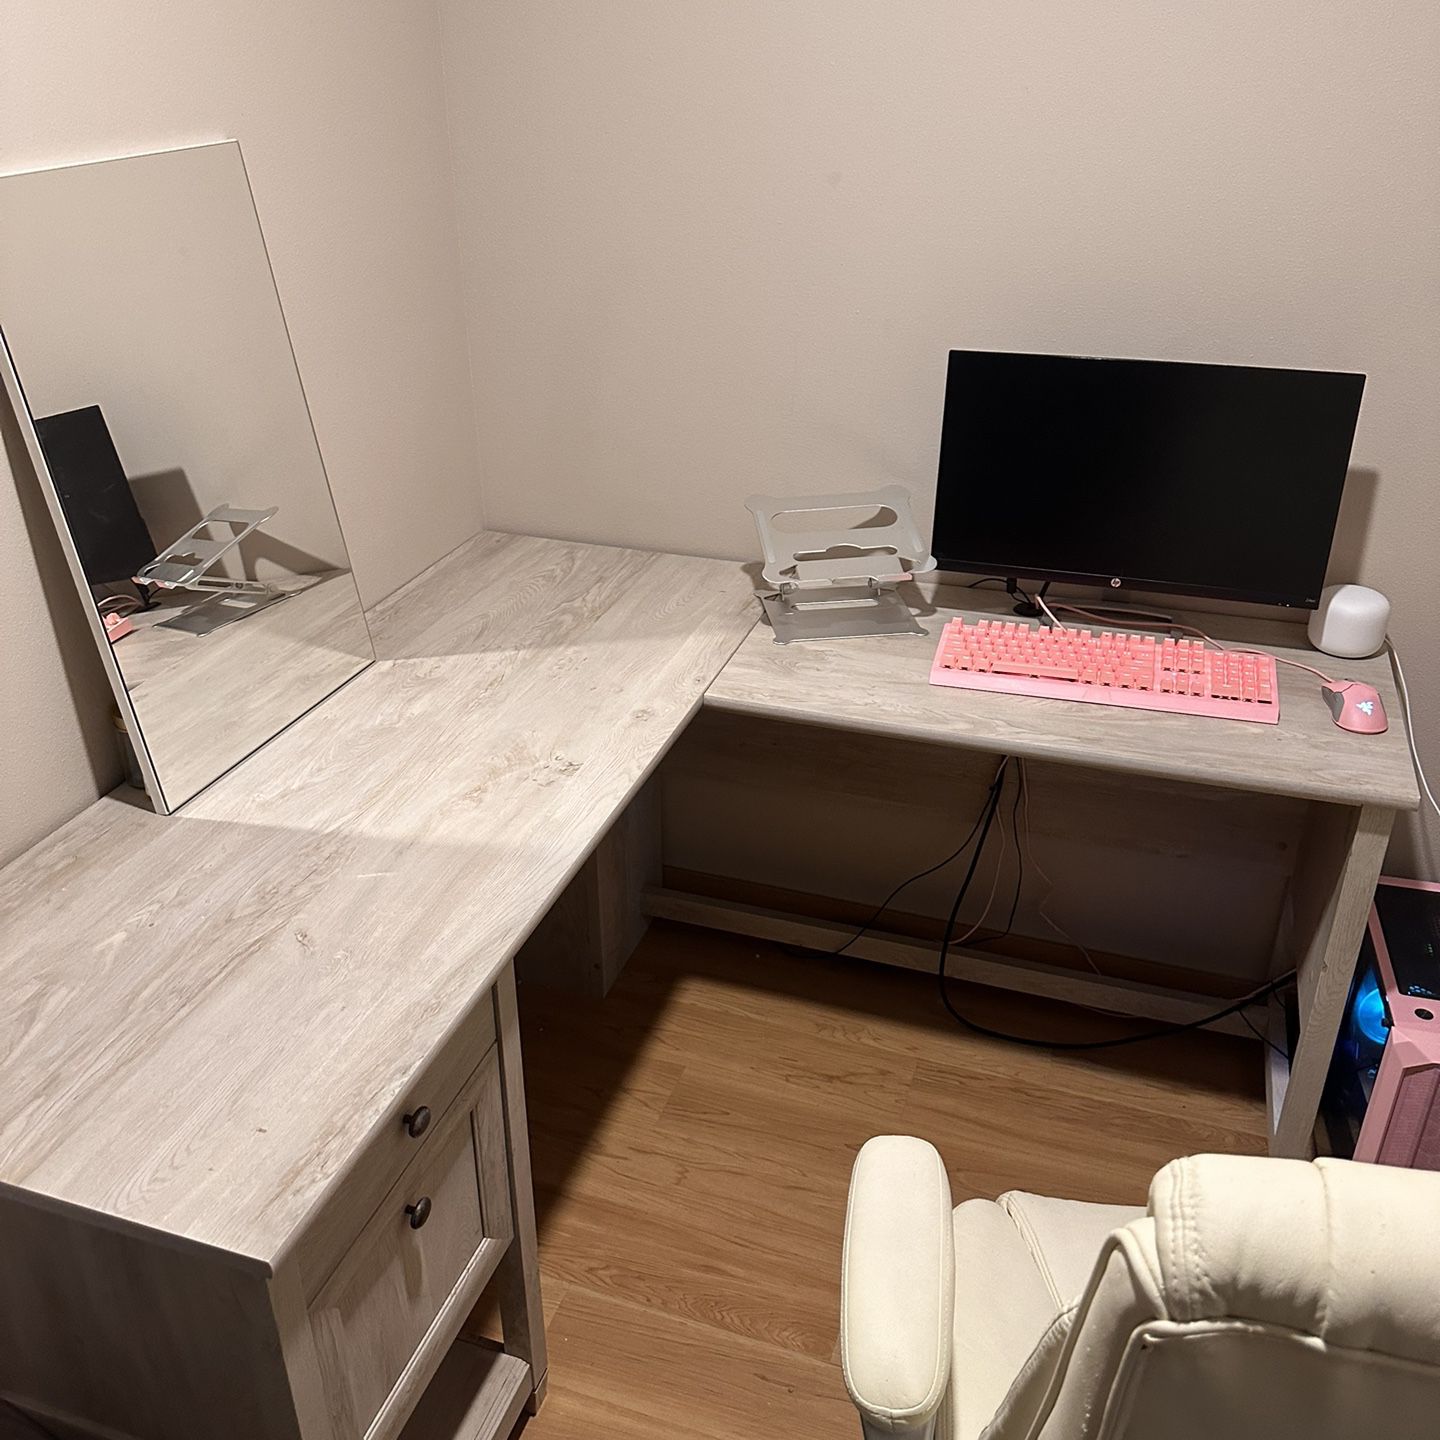 L Shaped Desk - Minor Wear And Tear (As Shown In Photo)